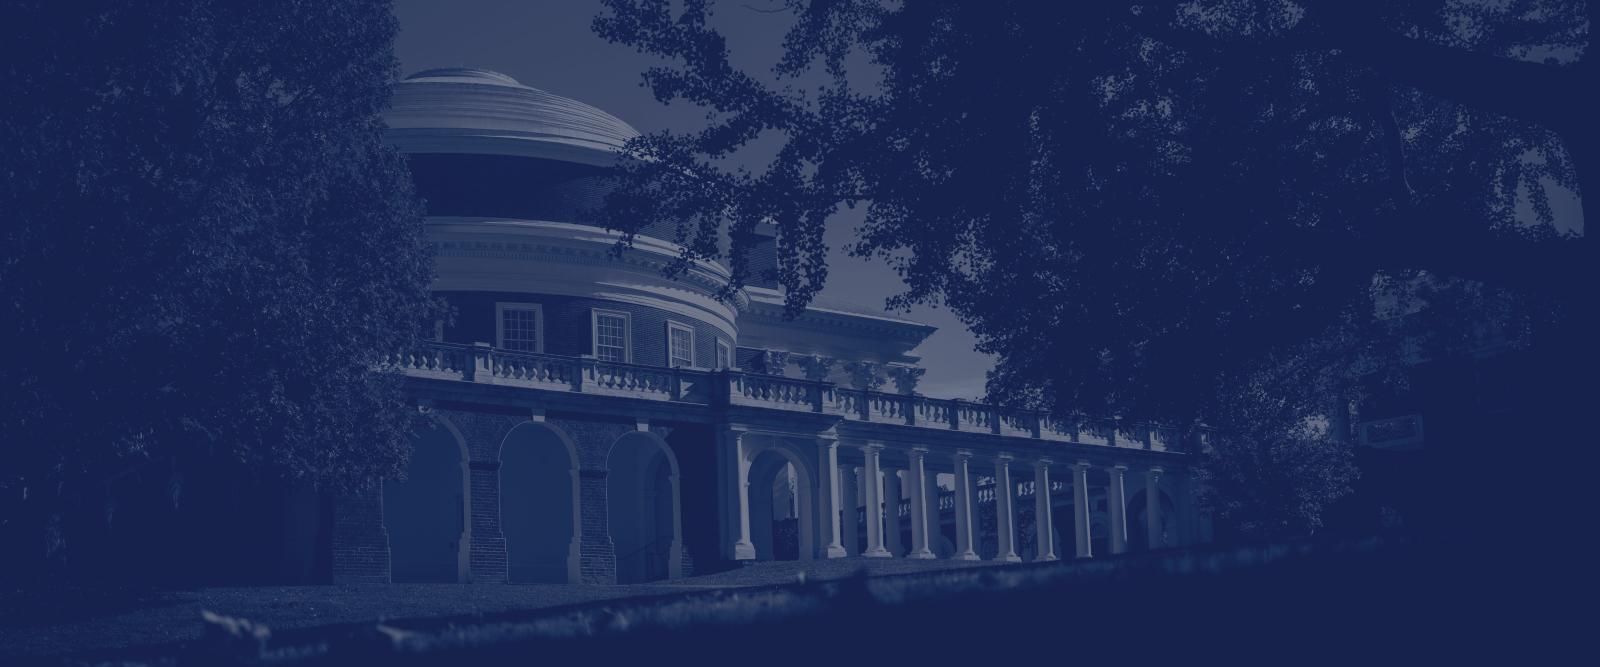 Jeffersonian Grounds | Give to UVA